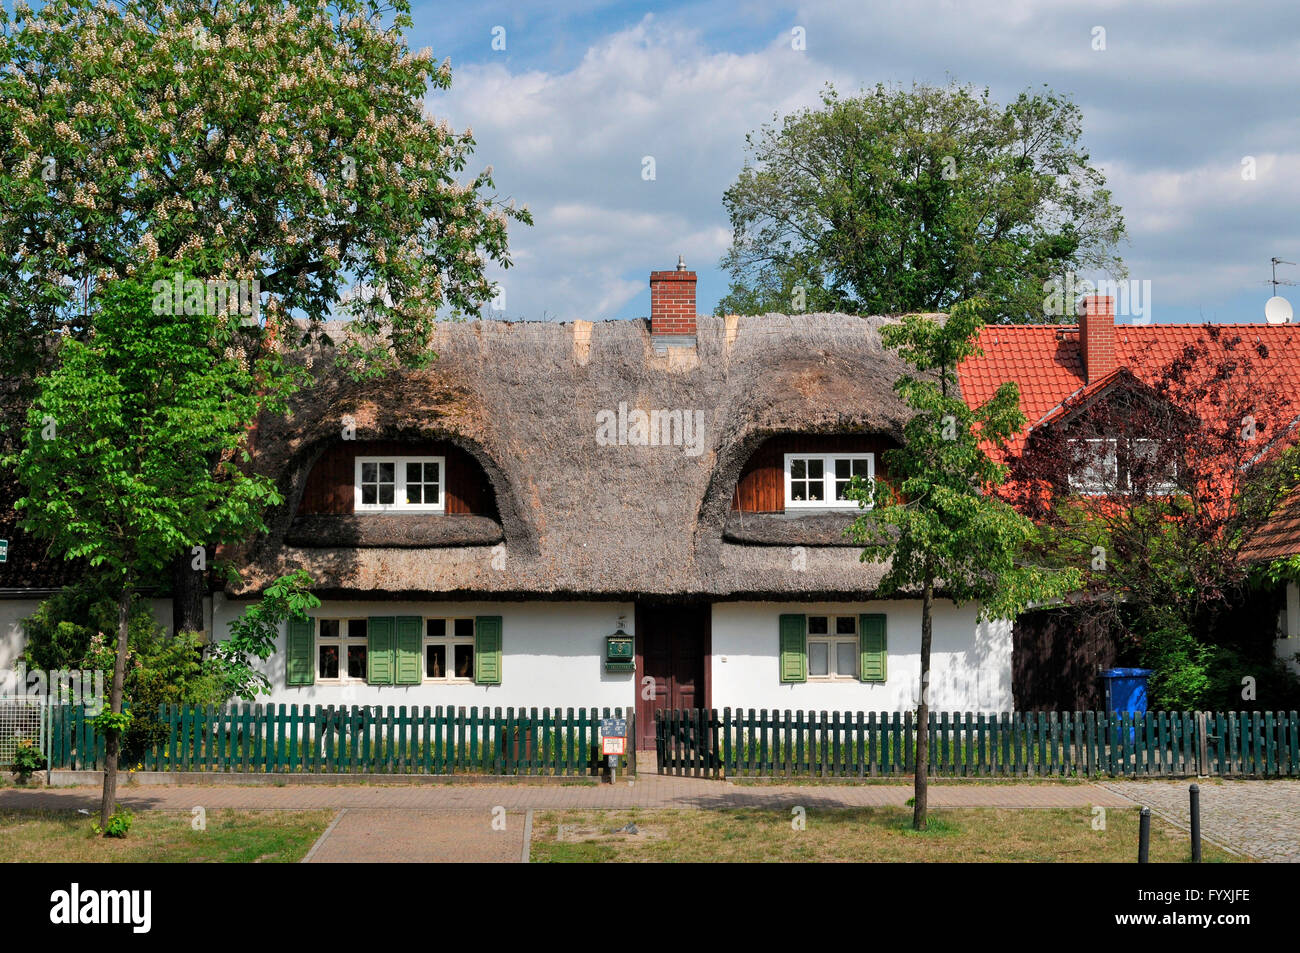 Thatched-roof house, Caputh, Brandenburg, Germany Stock Photo